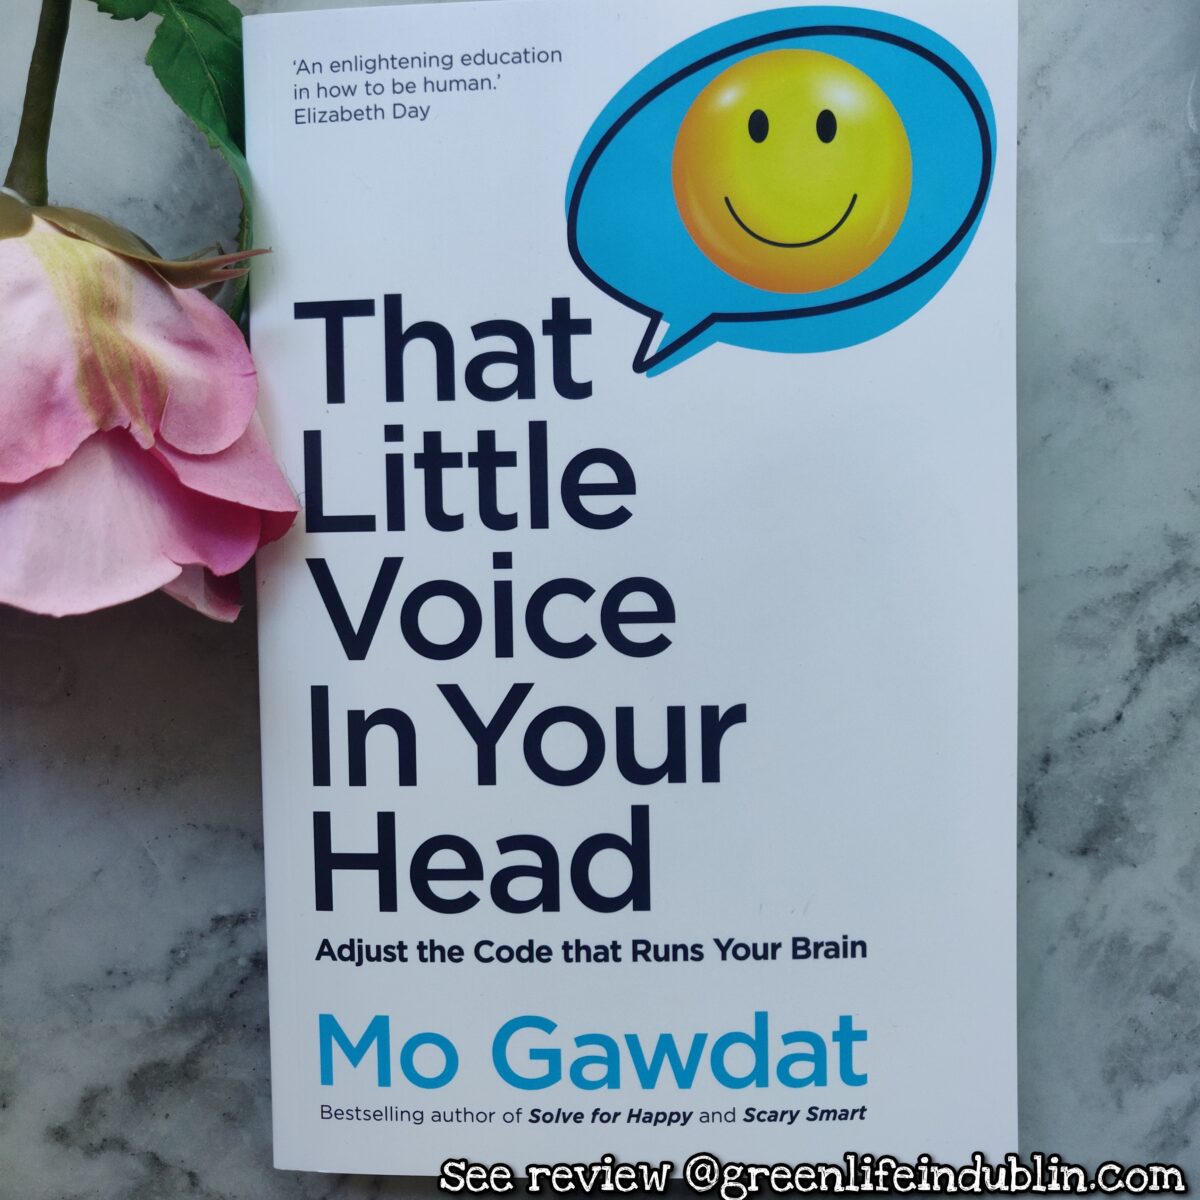 That Little Voice in Your Head by Mo Gawdat review – Green Life In Dublin reads